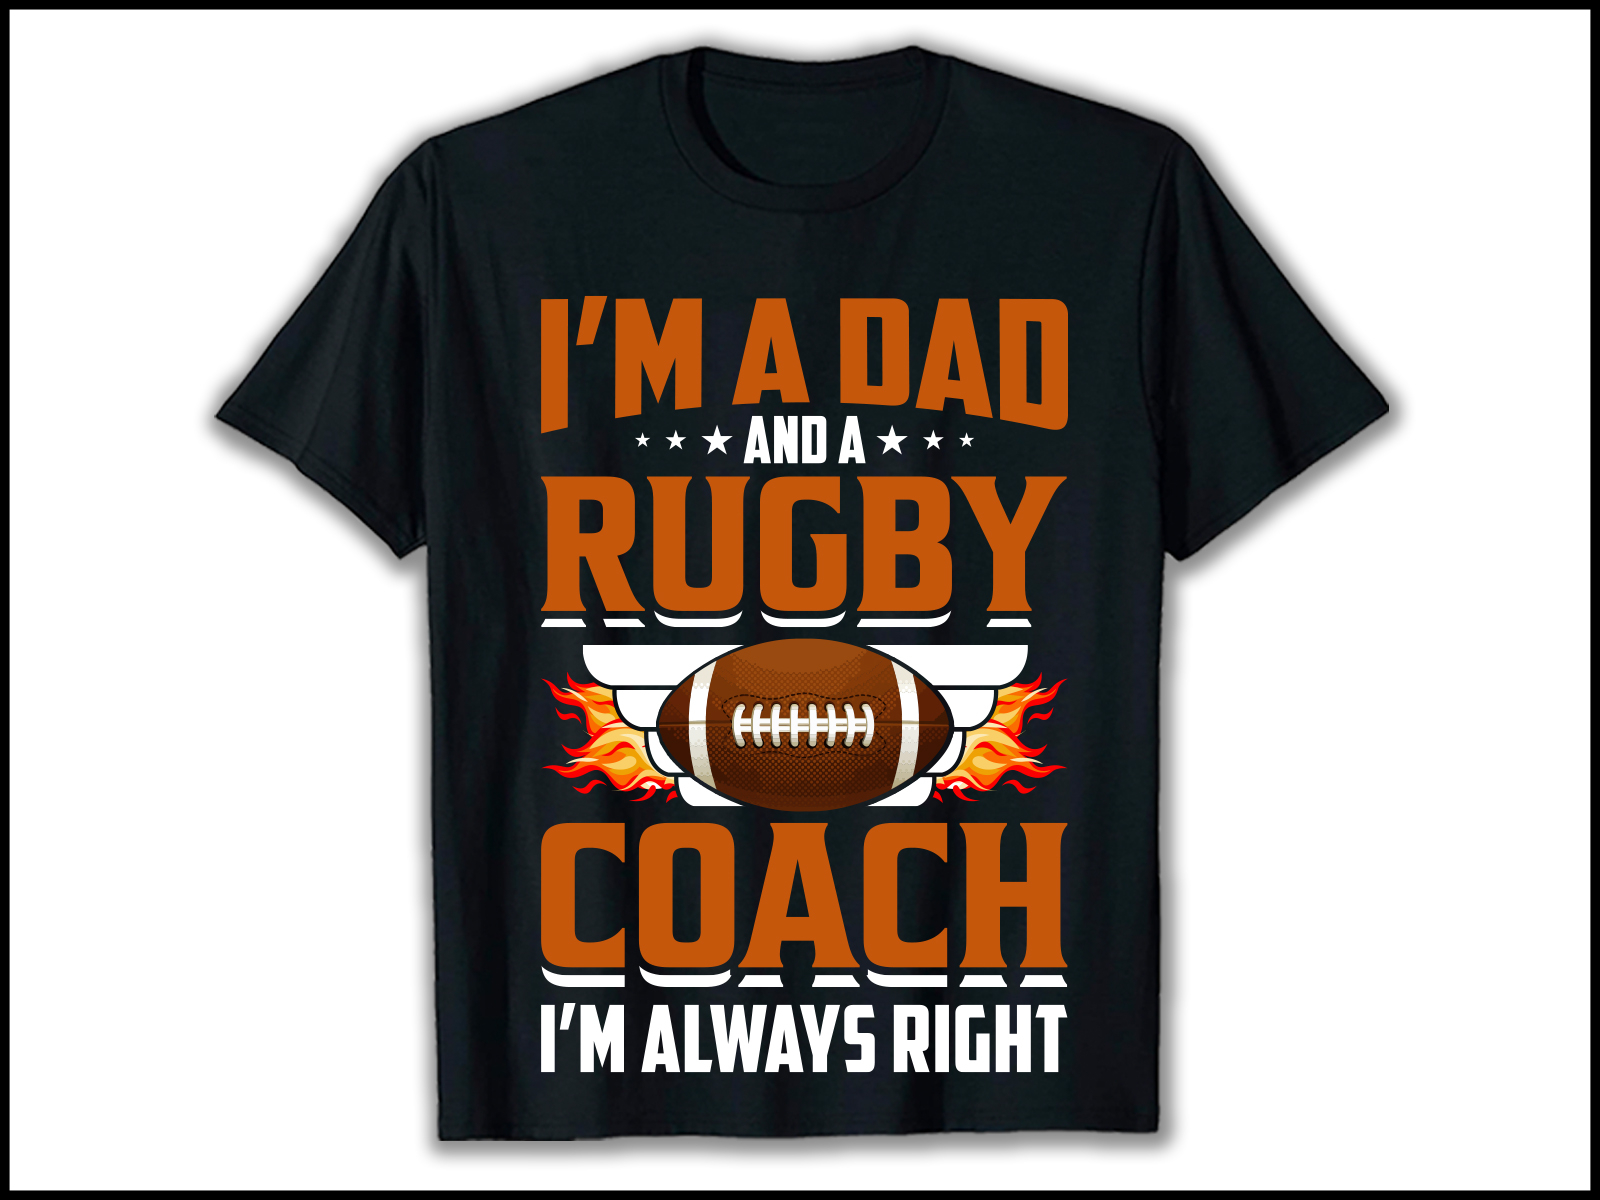 Creative Rugby t-shirt design amazon t shirts clothing clothing design custom t shirt custom t-shirt graphic design graphic t-shirt merch by amazon rugby t-shirt rugby t-shirt design rugby t-shirts shirtdesign t-shirt design t-shirt designs trendy t-shirt tshirt design tshirtdesign tshirts typography t shirt vintage t-shirt